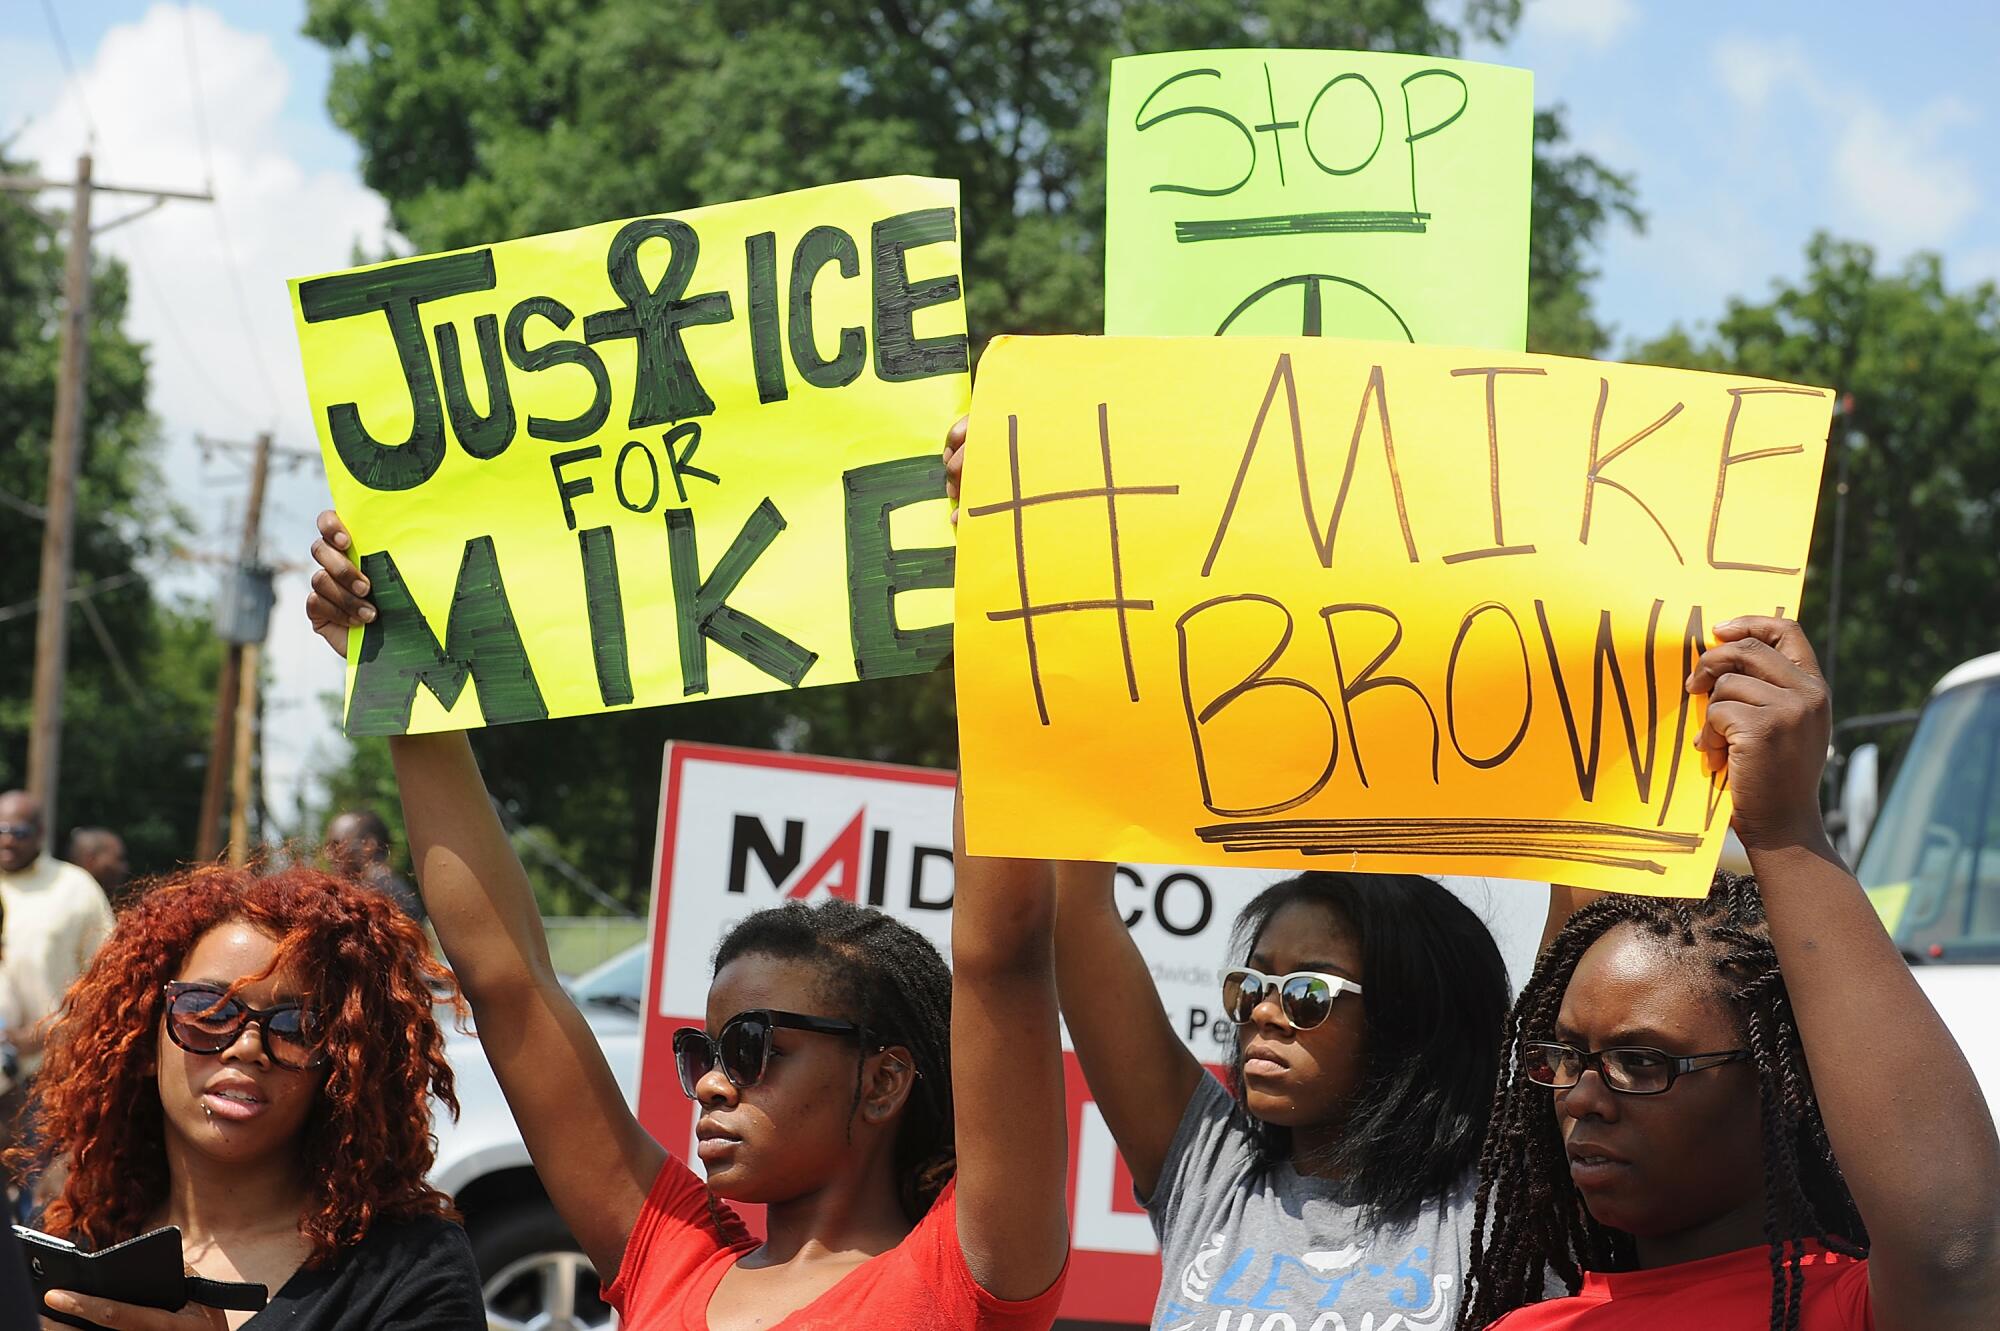 Protesters hold signs, one of which says, "Justice for Mike"